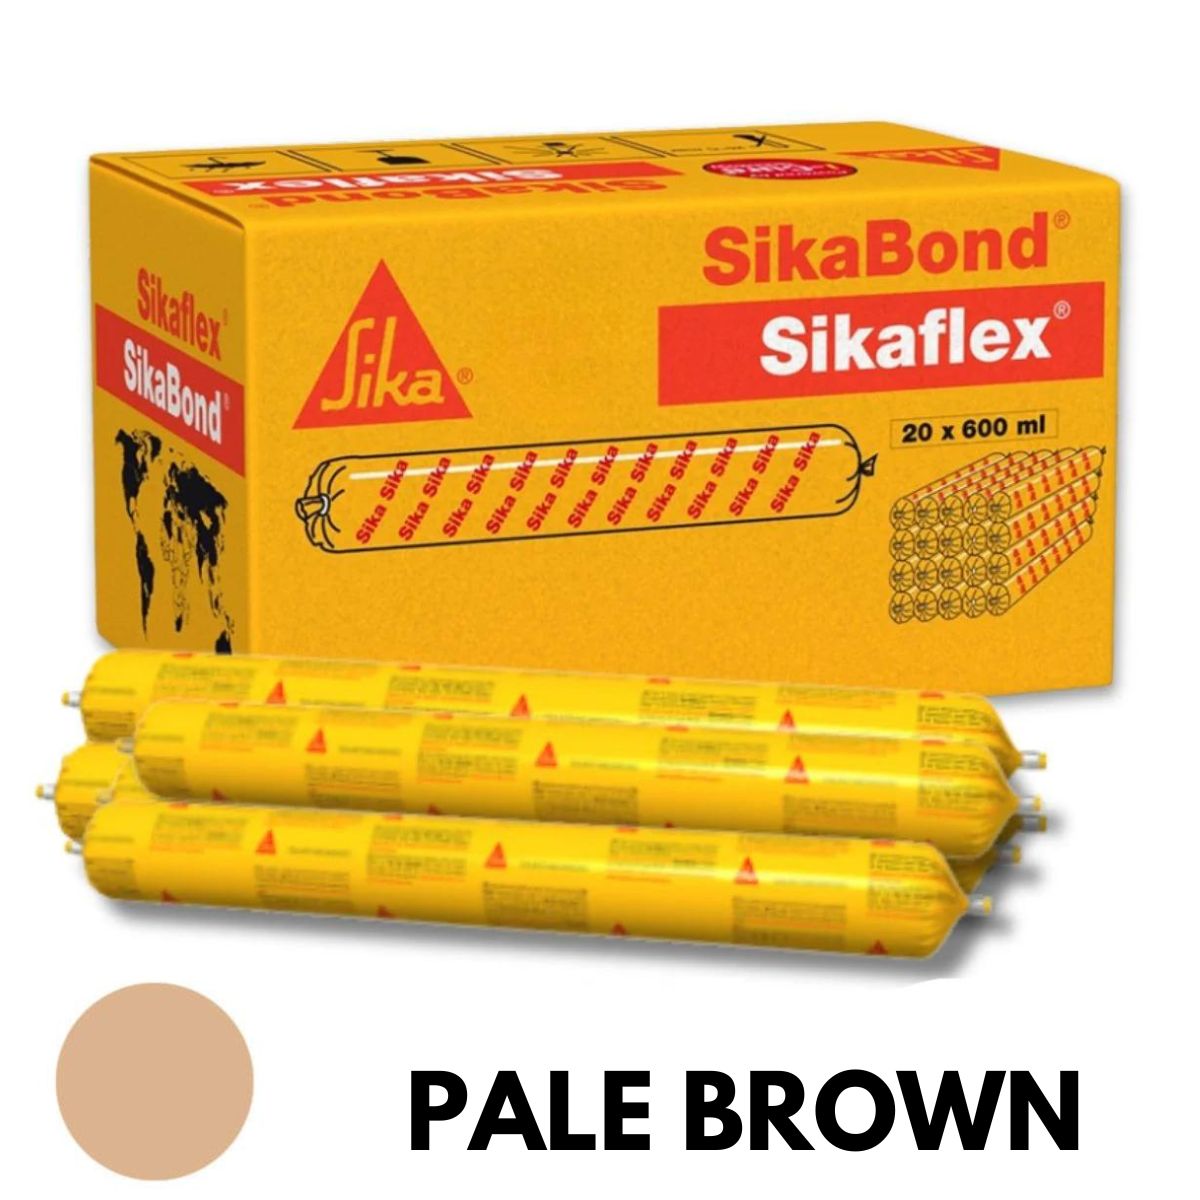 Sika 520427 600ml Sikaflex Pro Pale Brown Polyurethane Joint Sealant | 20 SAUSAGES - South East Clearance Centre